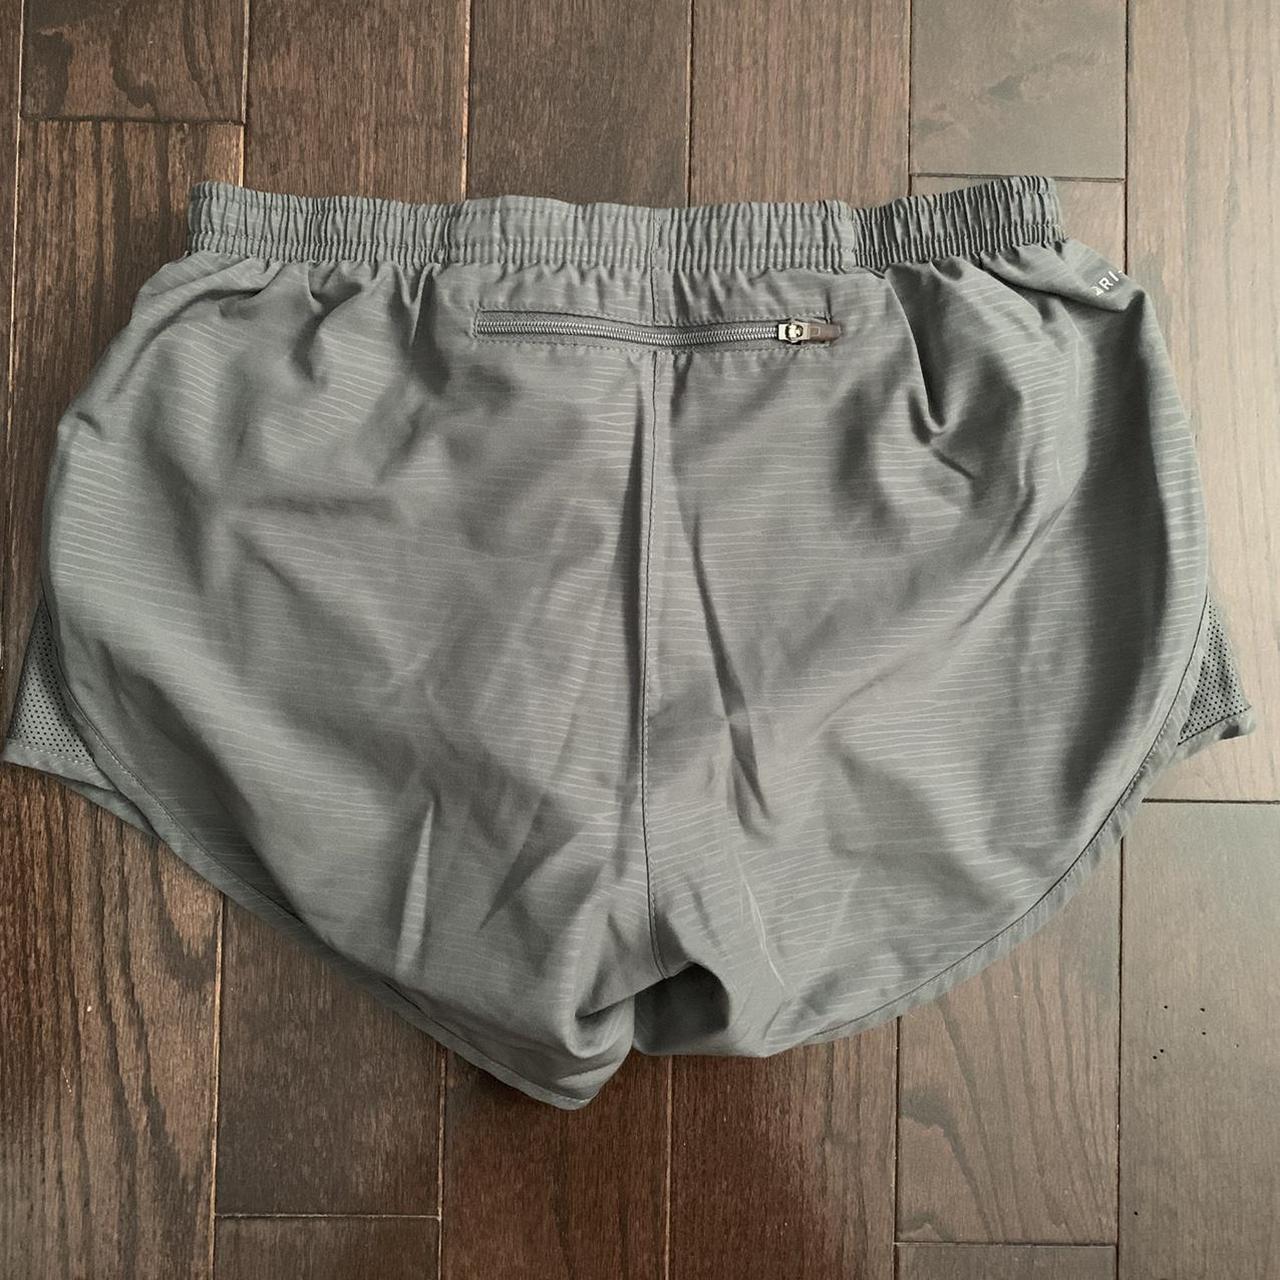 Nike Women's Grey and Silver Shorts (2)